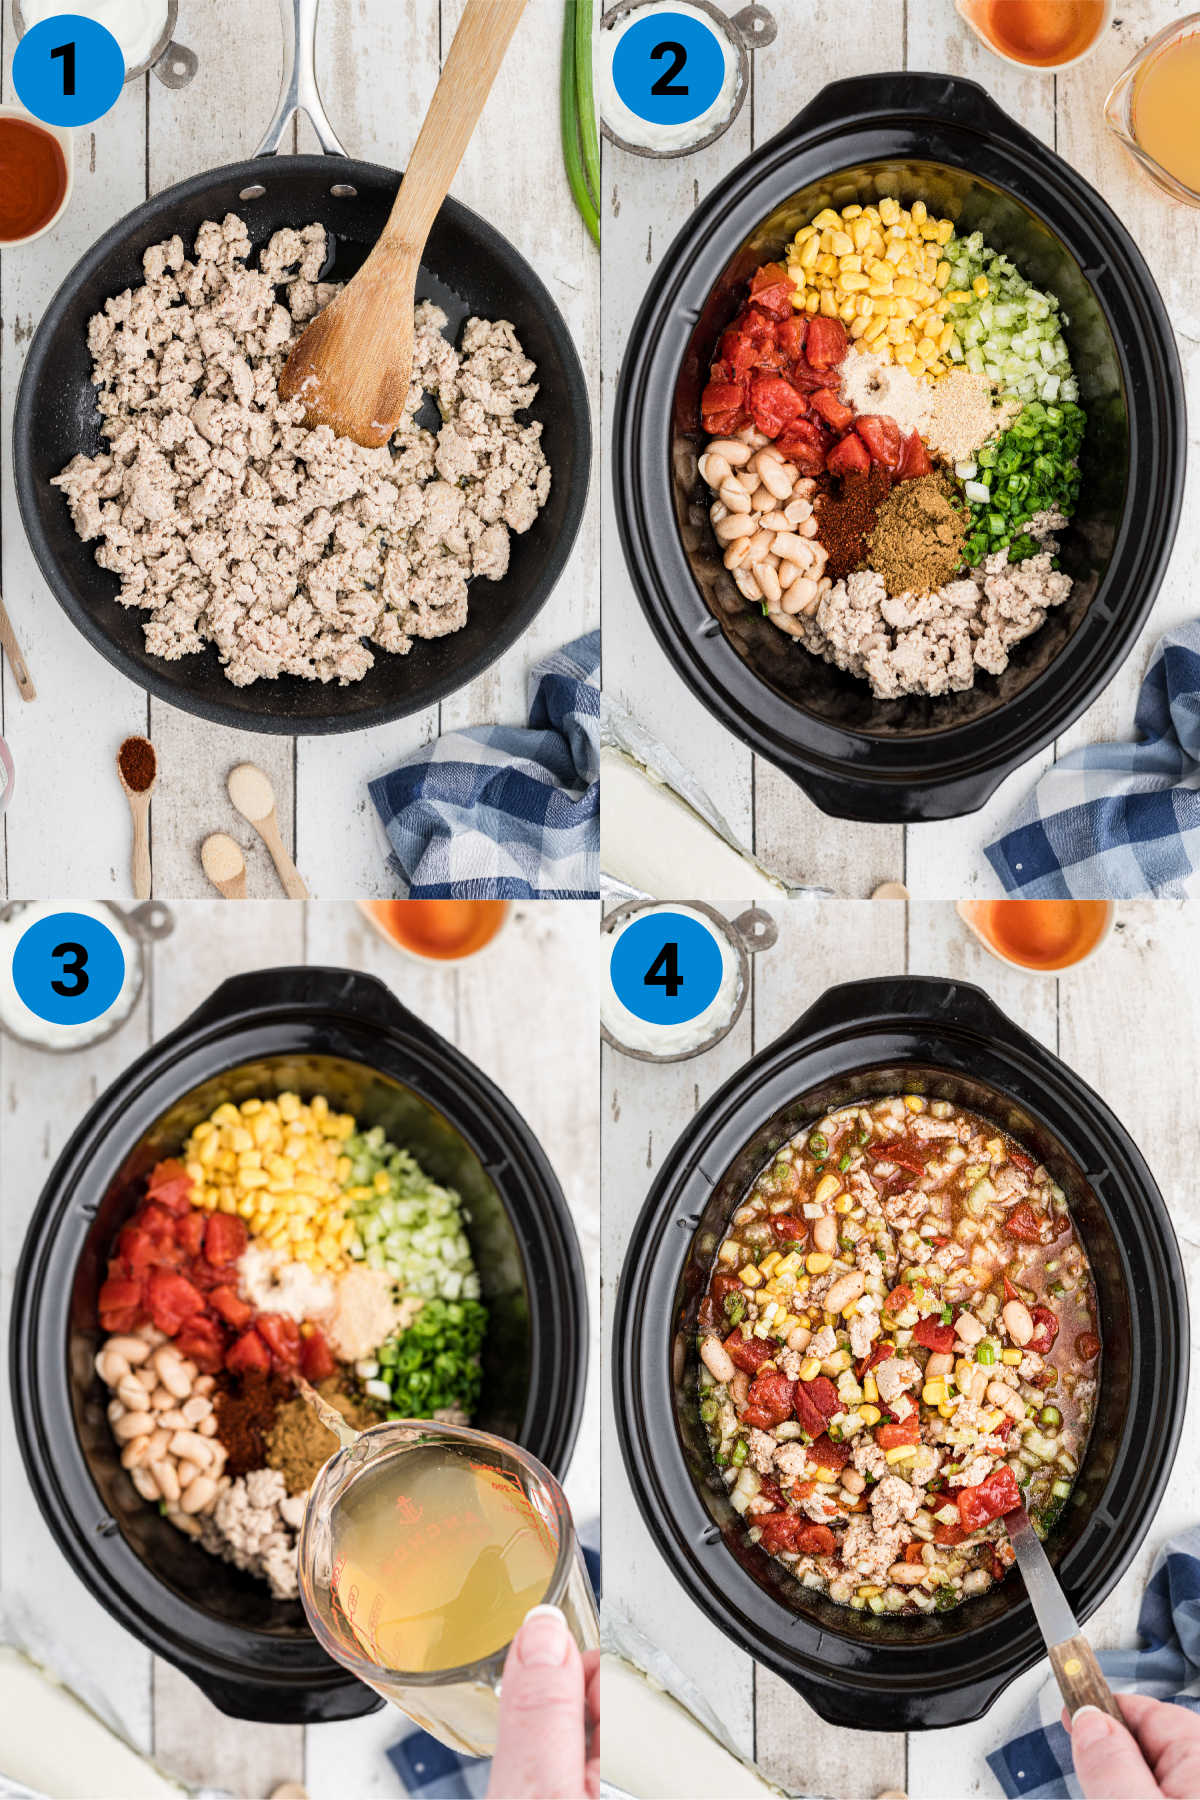 four images in a collage showing steps 1-4 of how to make a slow cooker buffalo chicken chili recipe